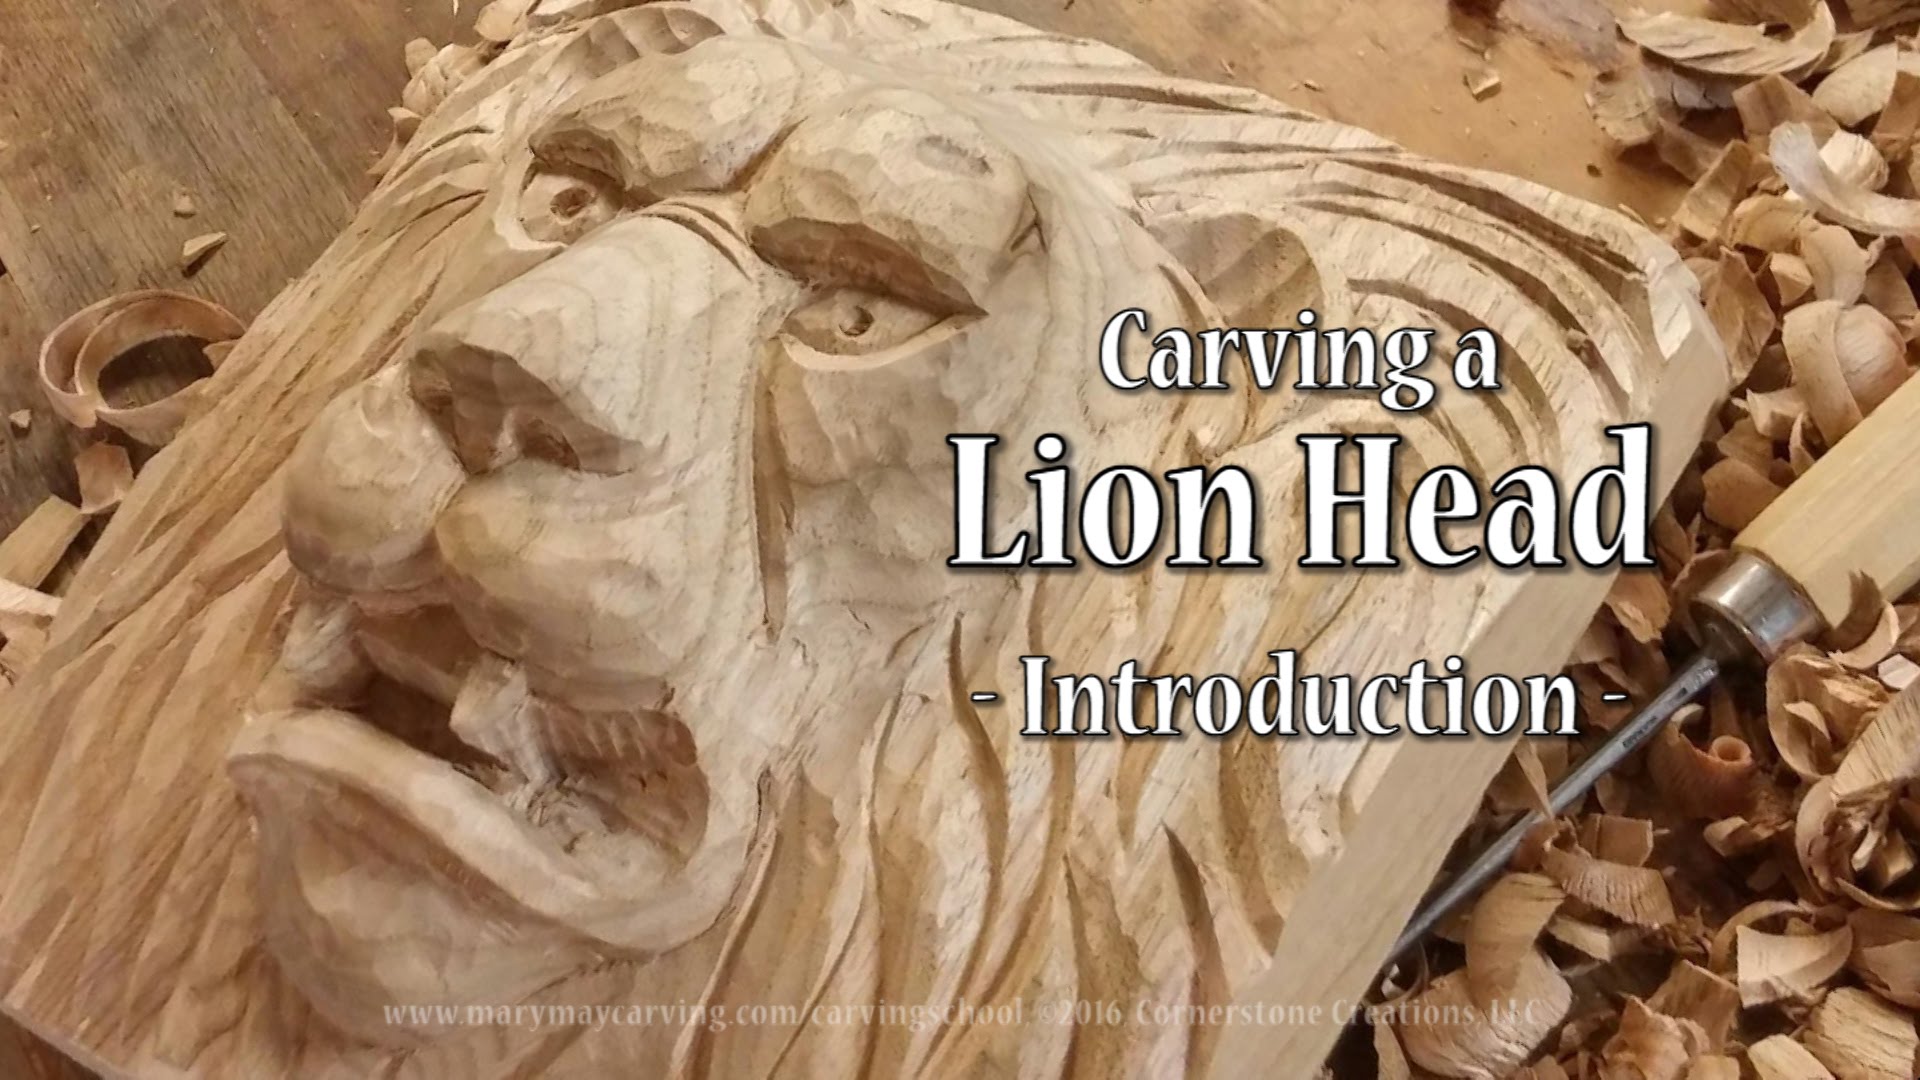 Carving a Lion Head - Introduction - YouTube